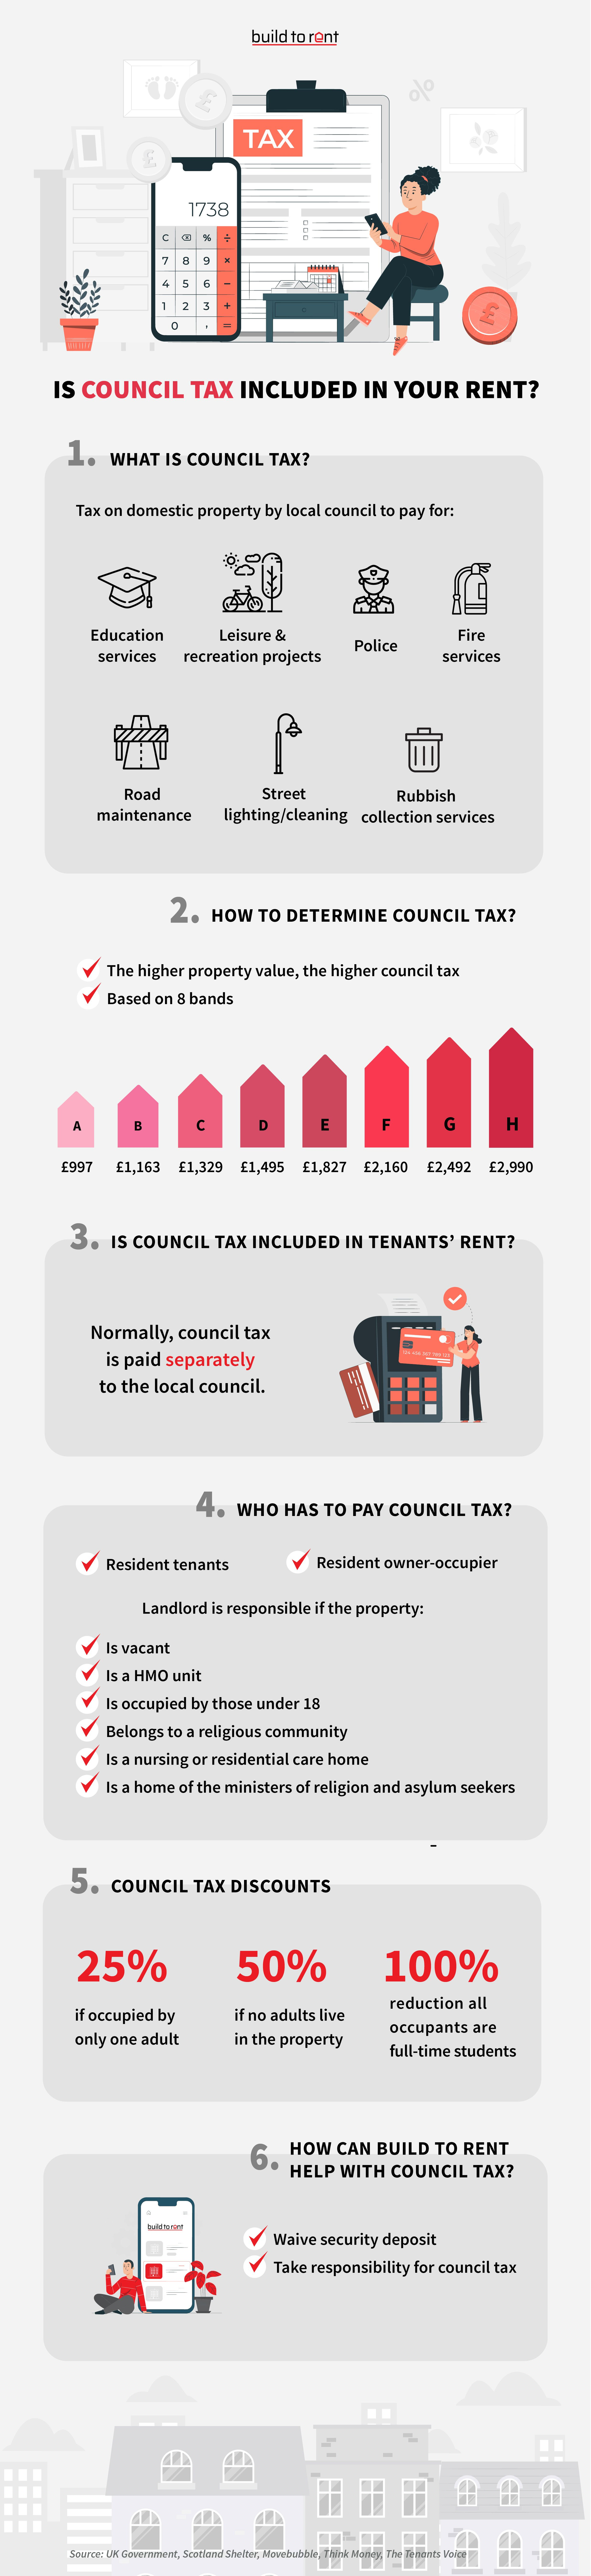 Is Council Tax Included In Your Rent